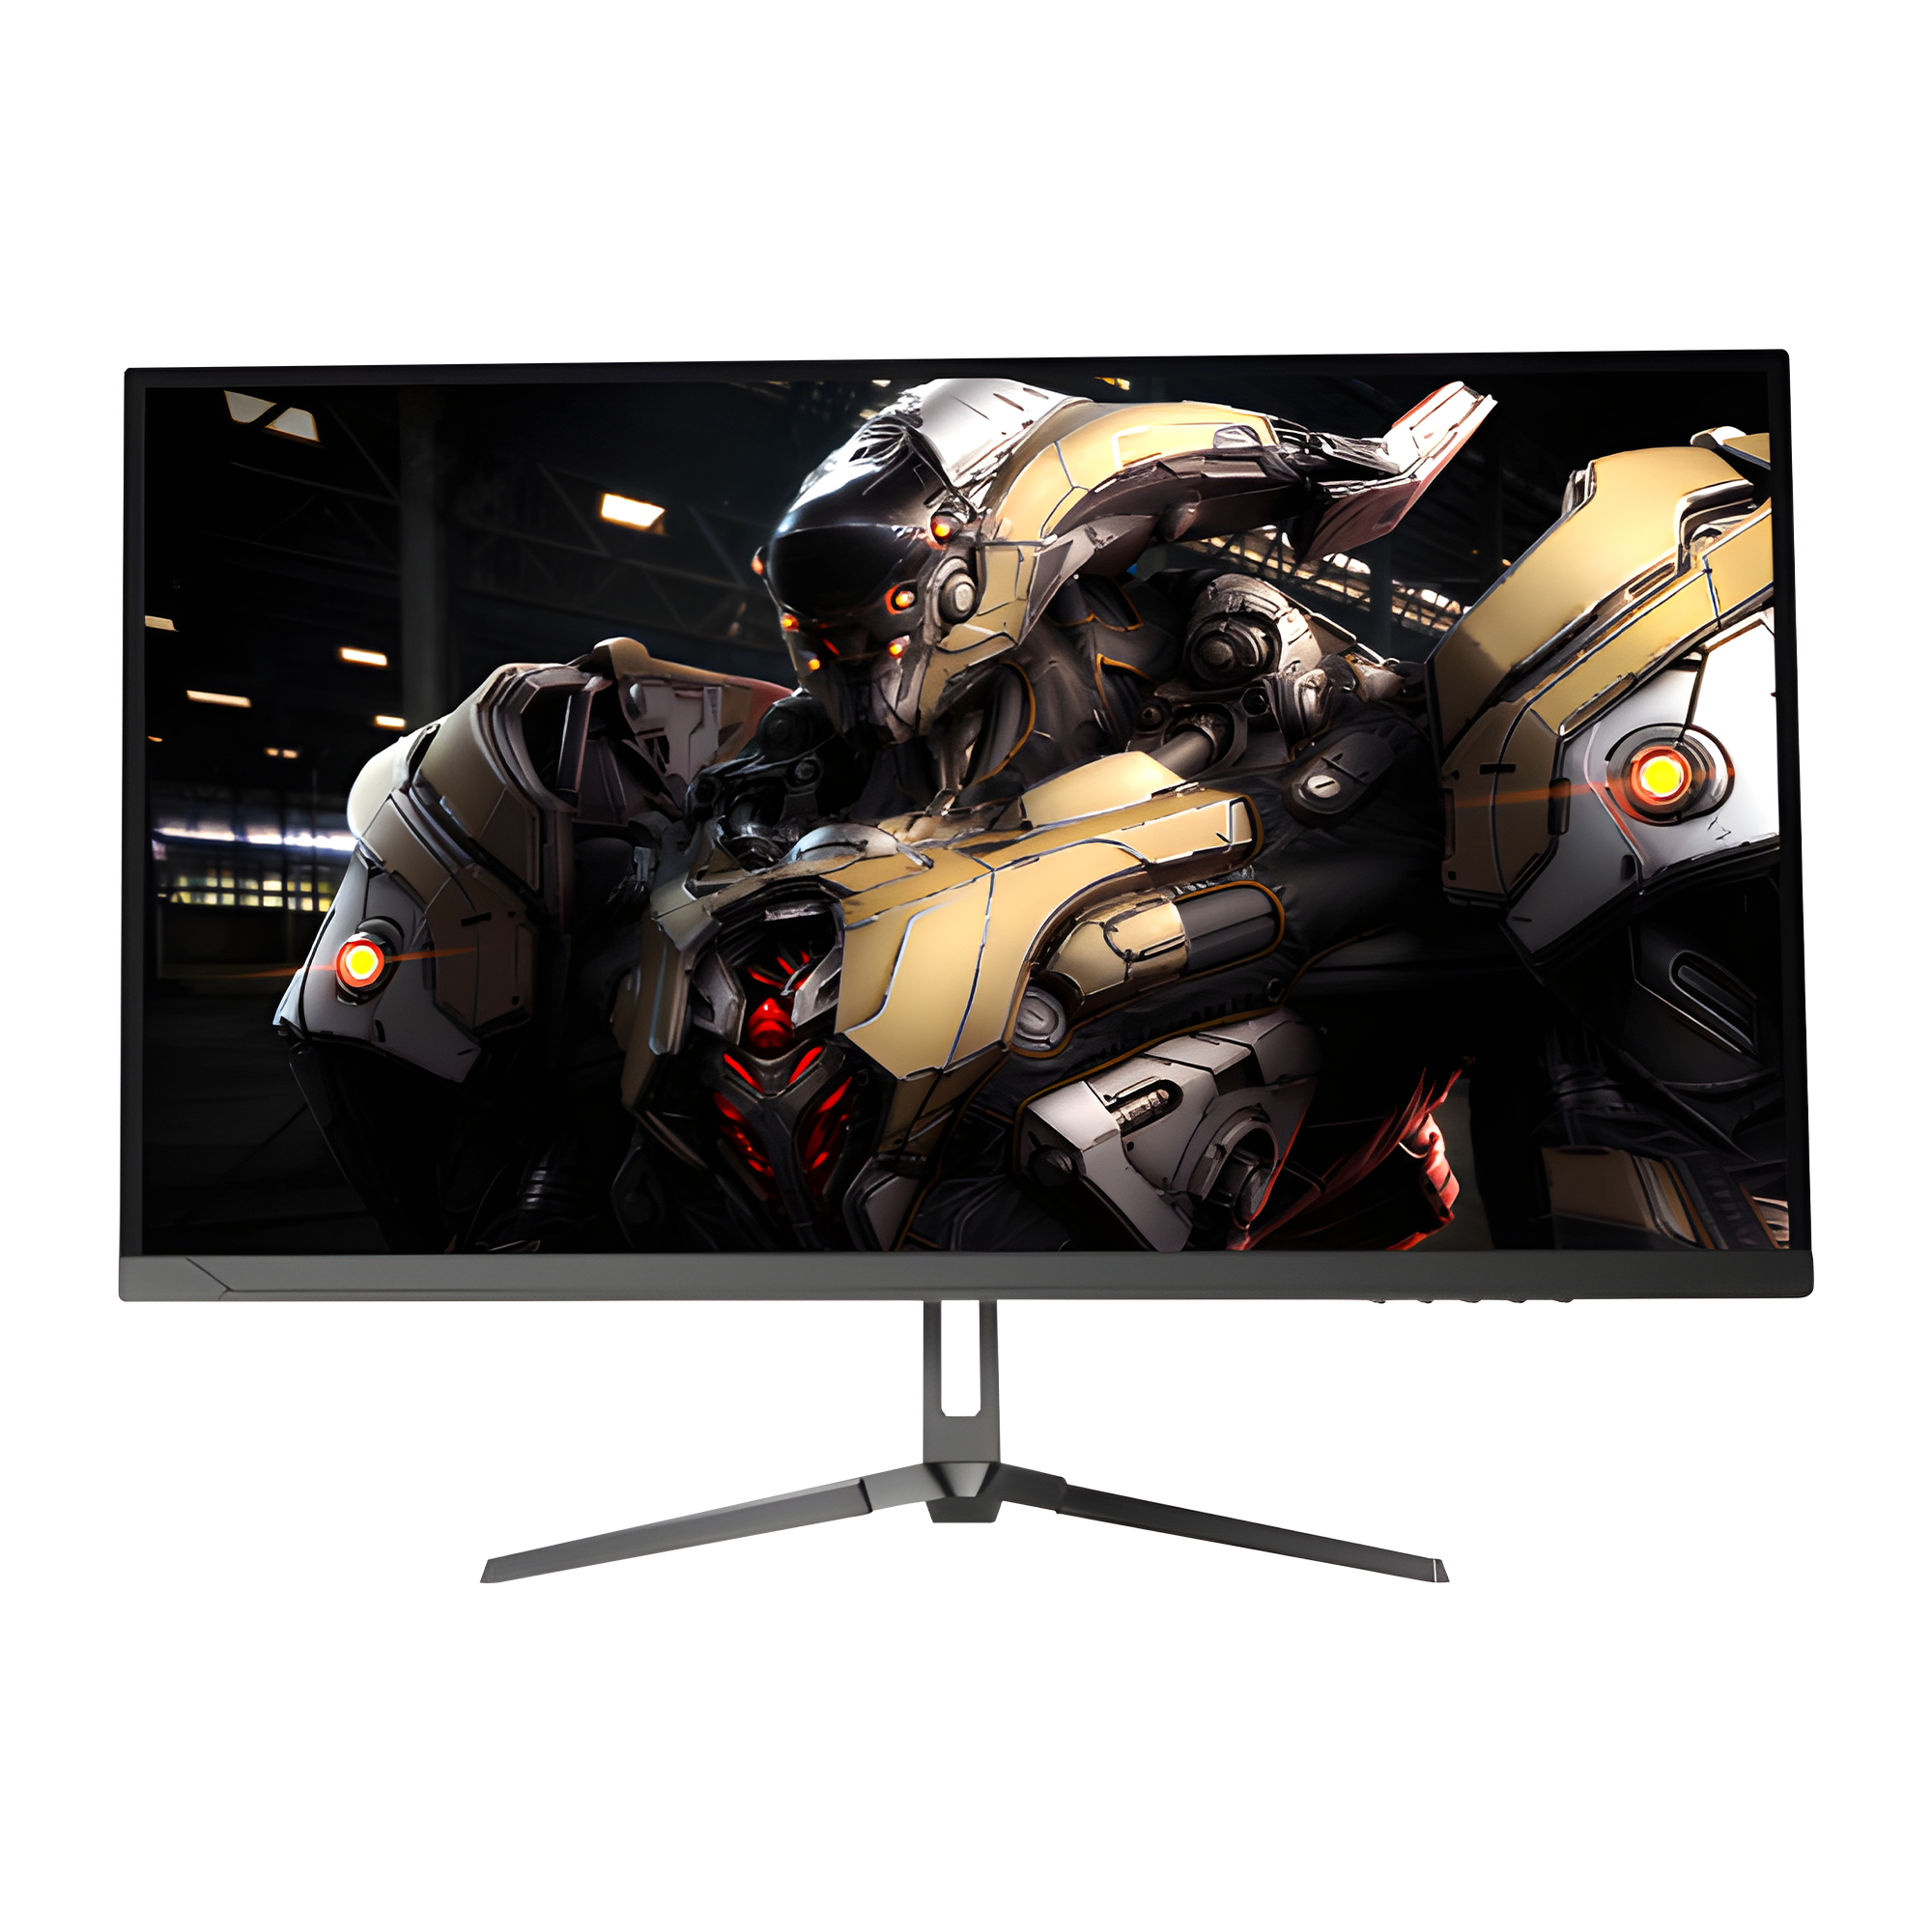 Model: CG27DQI-180Hz Featured Image